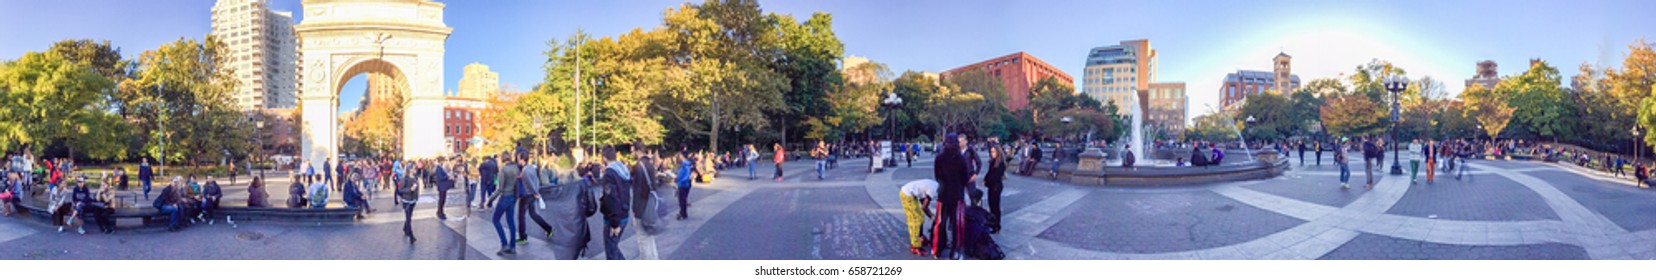 NEW YORK CITY - OCTOBER 2015: Tourists in Washington Park. New York attracts 50 million people annually.